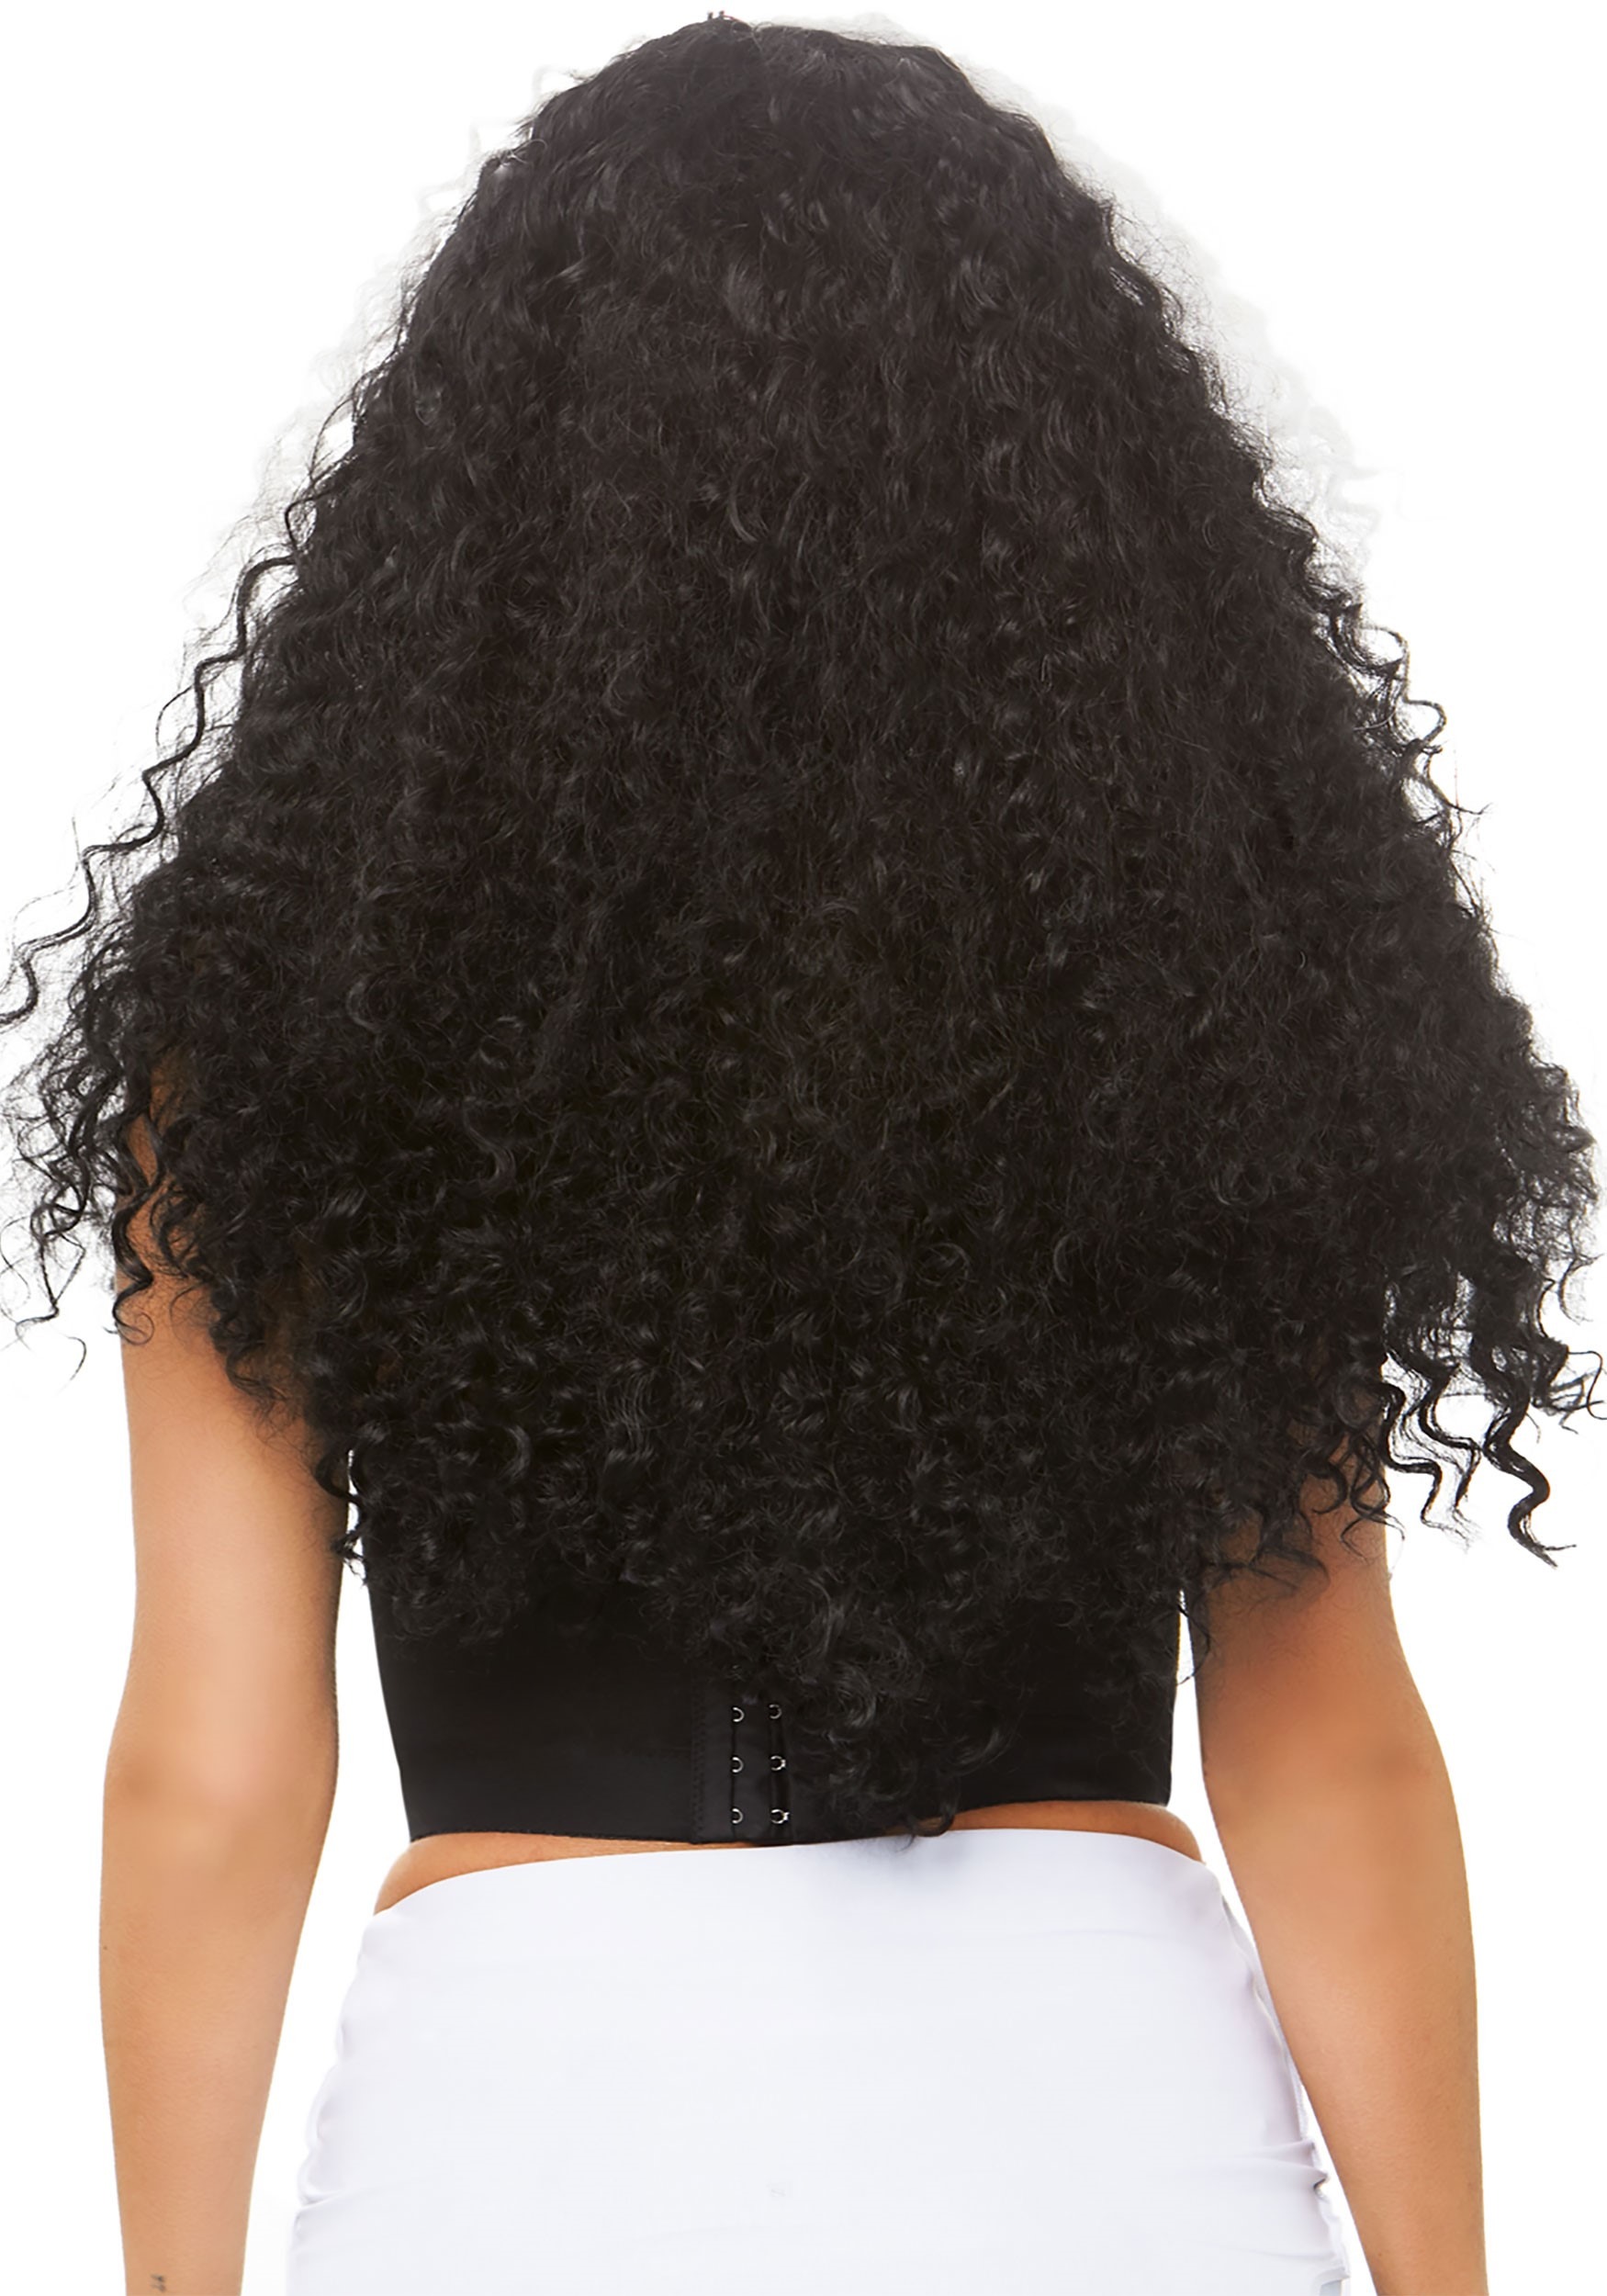 Long Women's Curly Black And White Wig